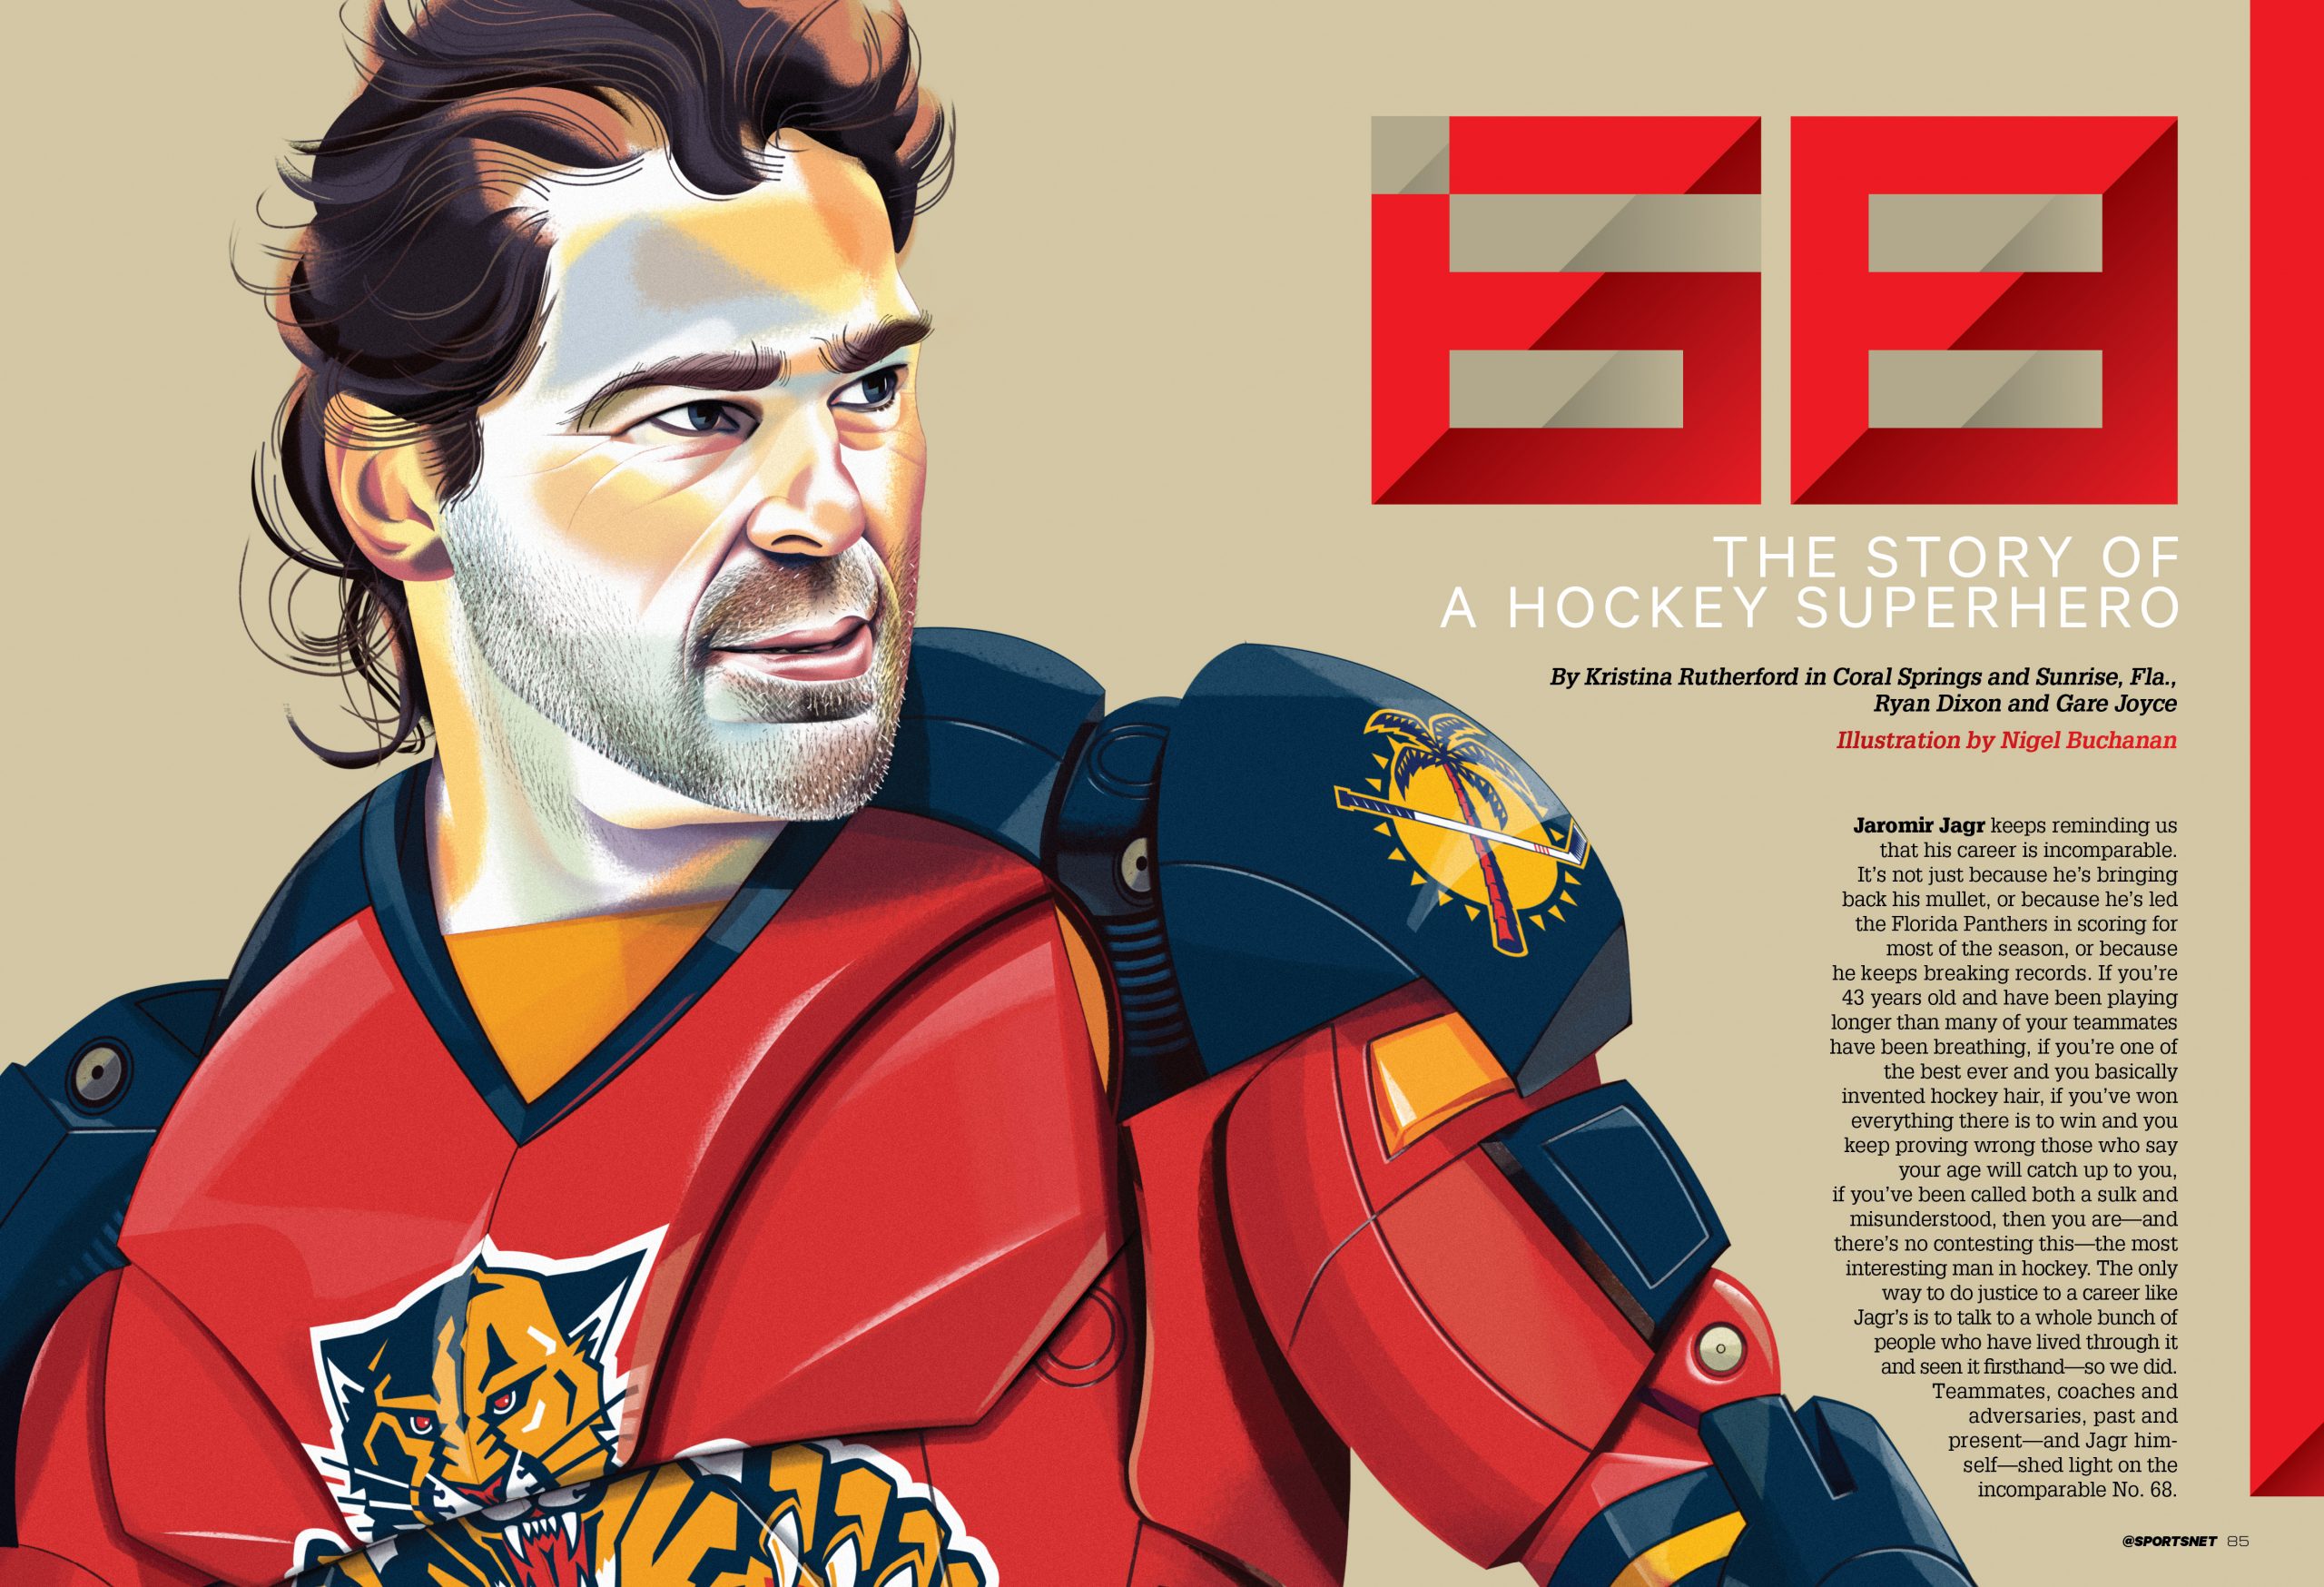 Jaromir Jagr lighting it up for the Devils as his colorful hockey